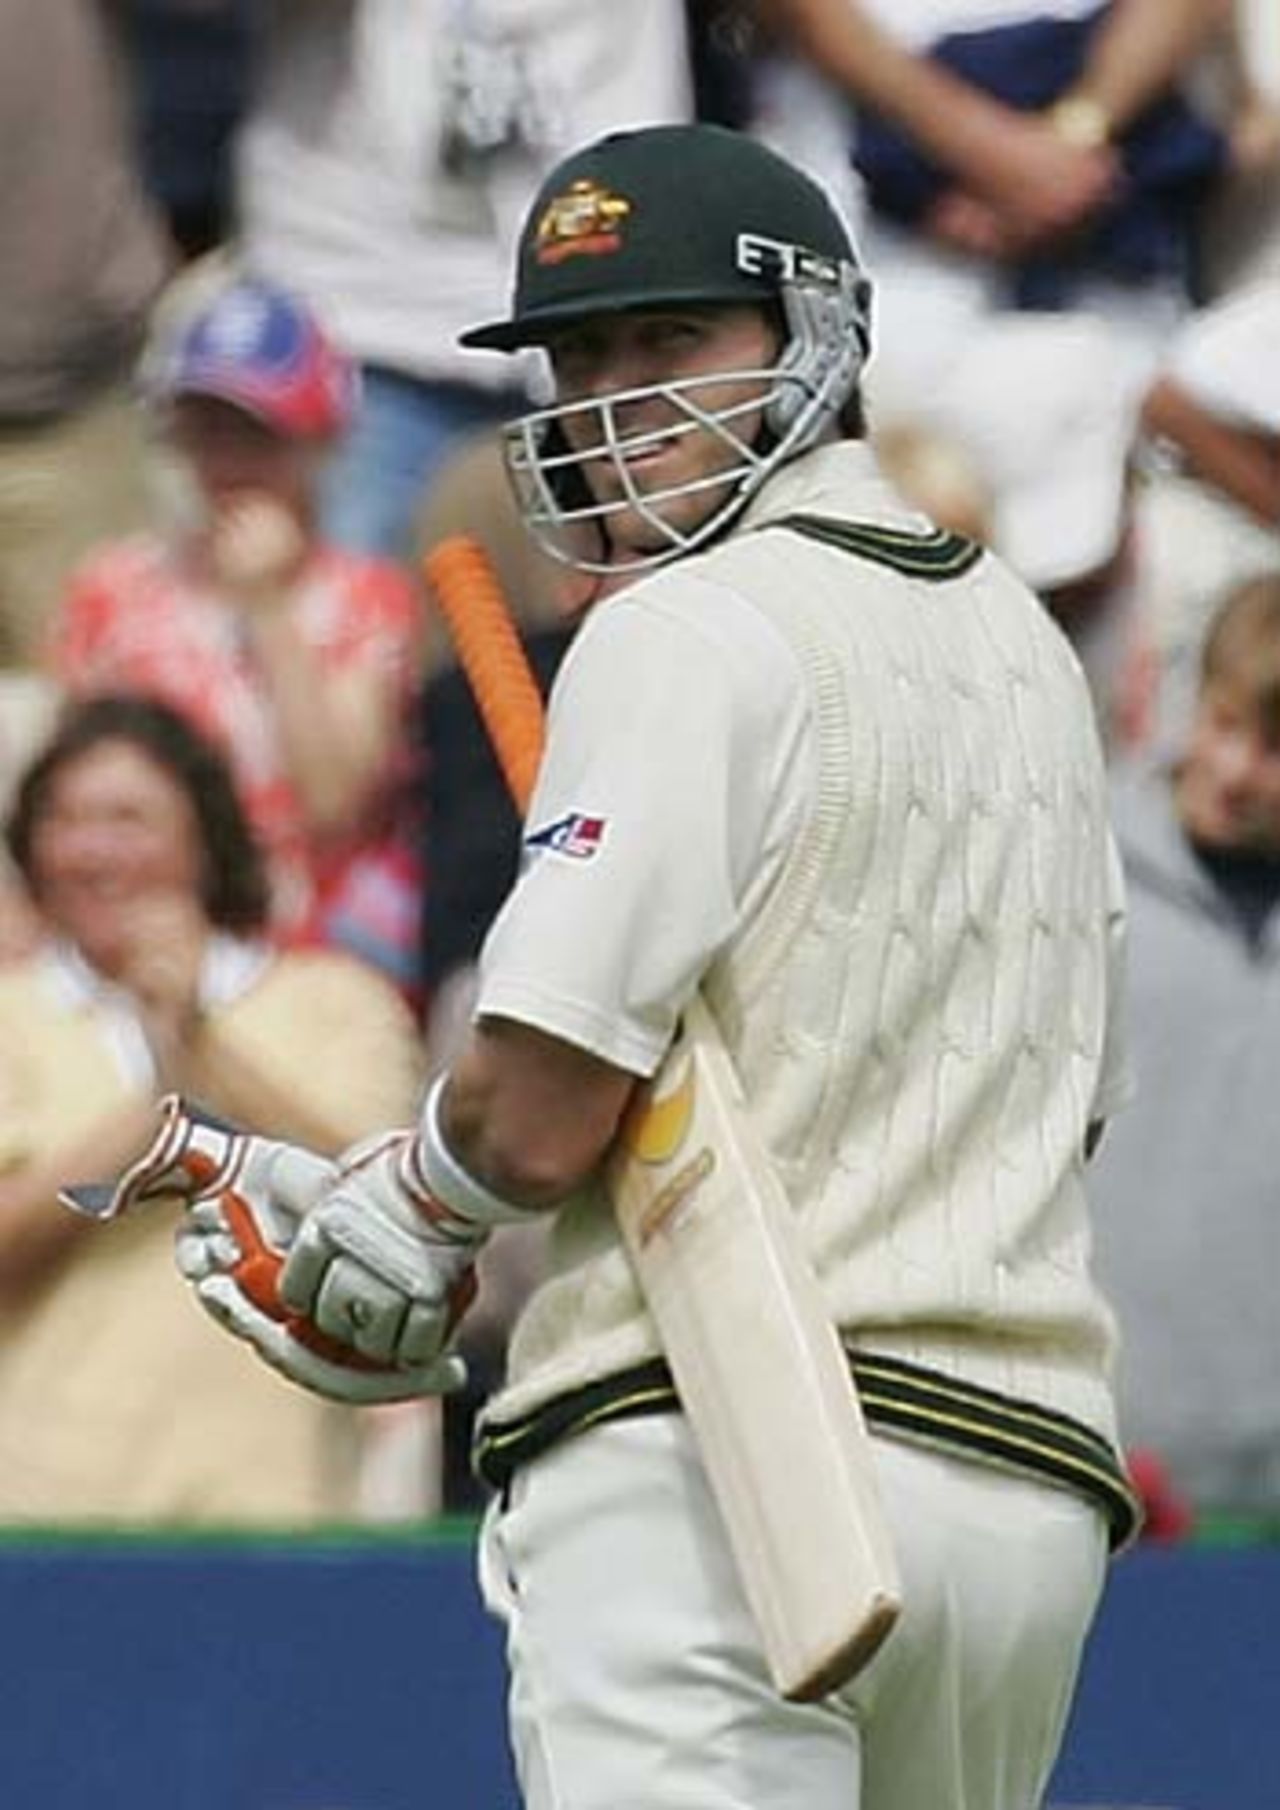 A rueful look back from Damien Martyn after his innings had been cut short by Steve Bucknor's poor lbew decision, England v Australia, 3rd Test, Old Trafford, August 15, 2005